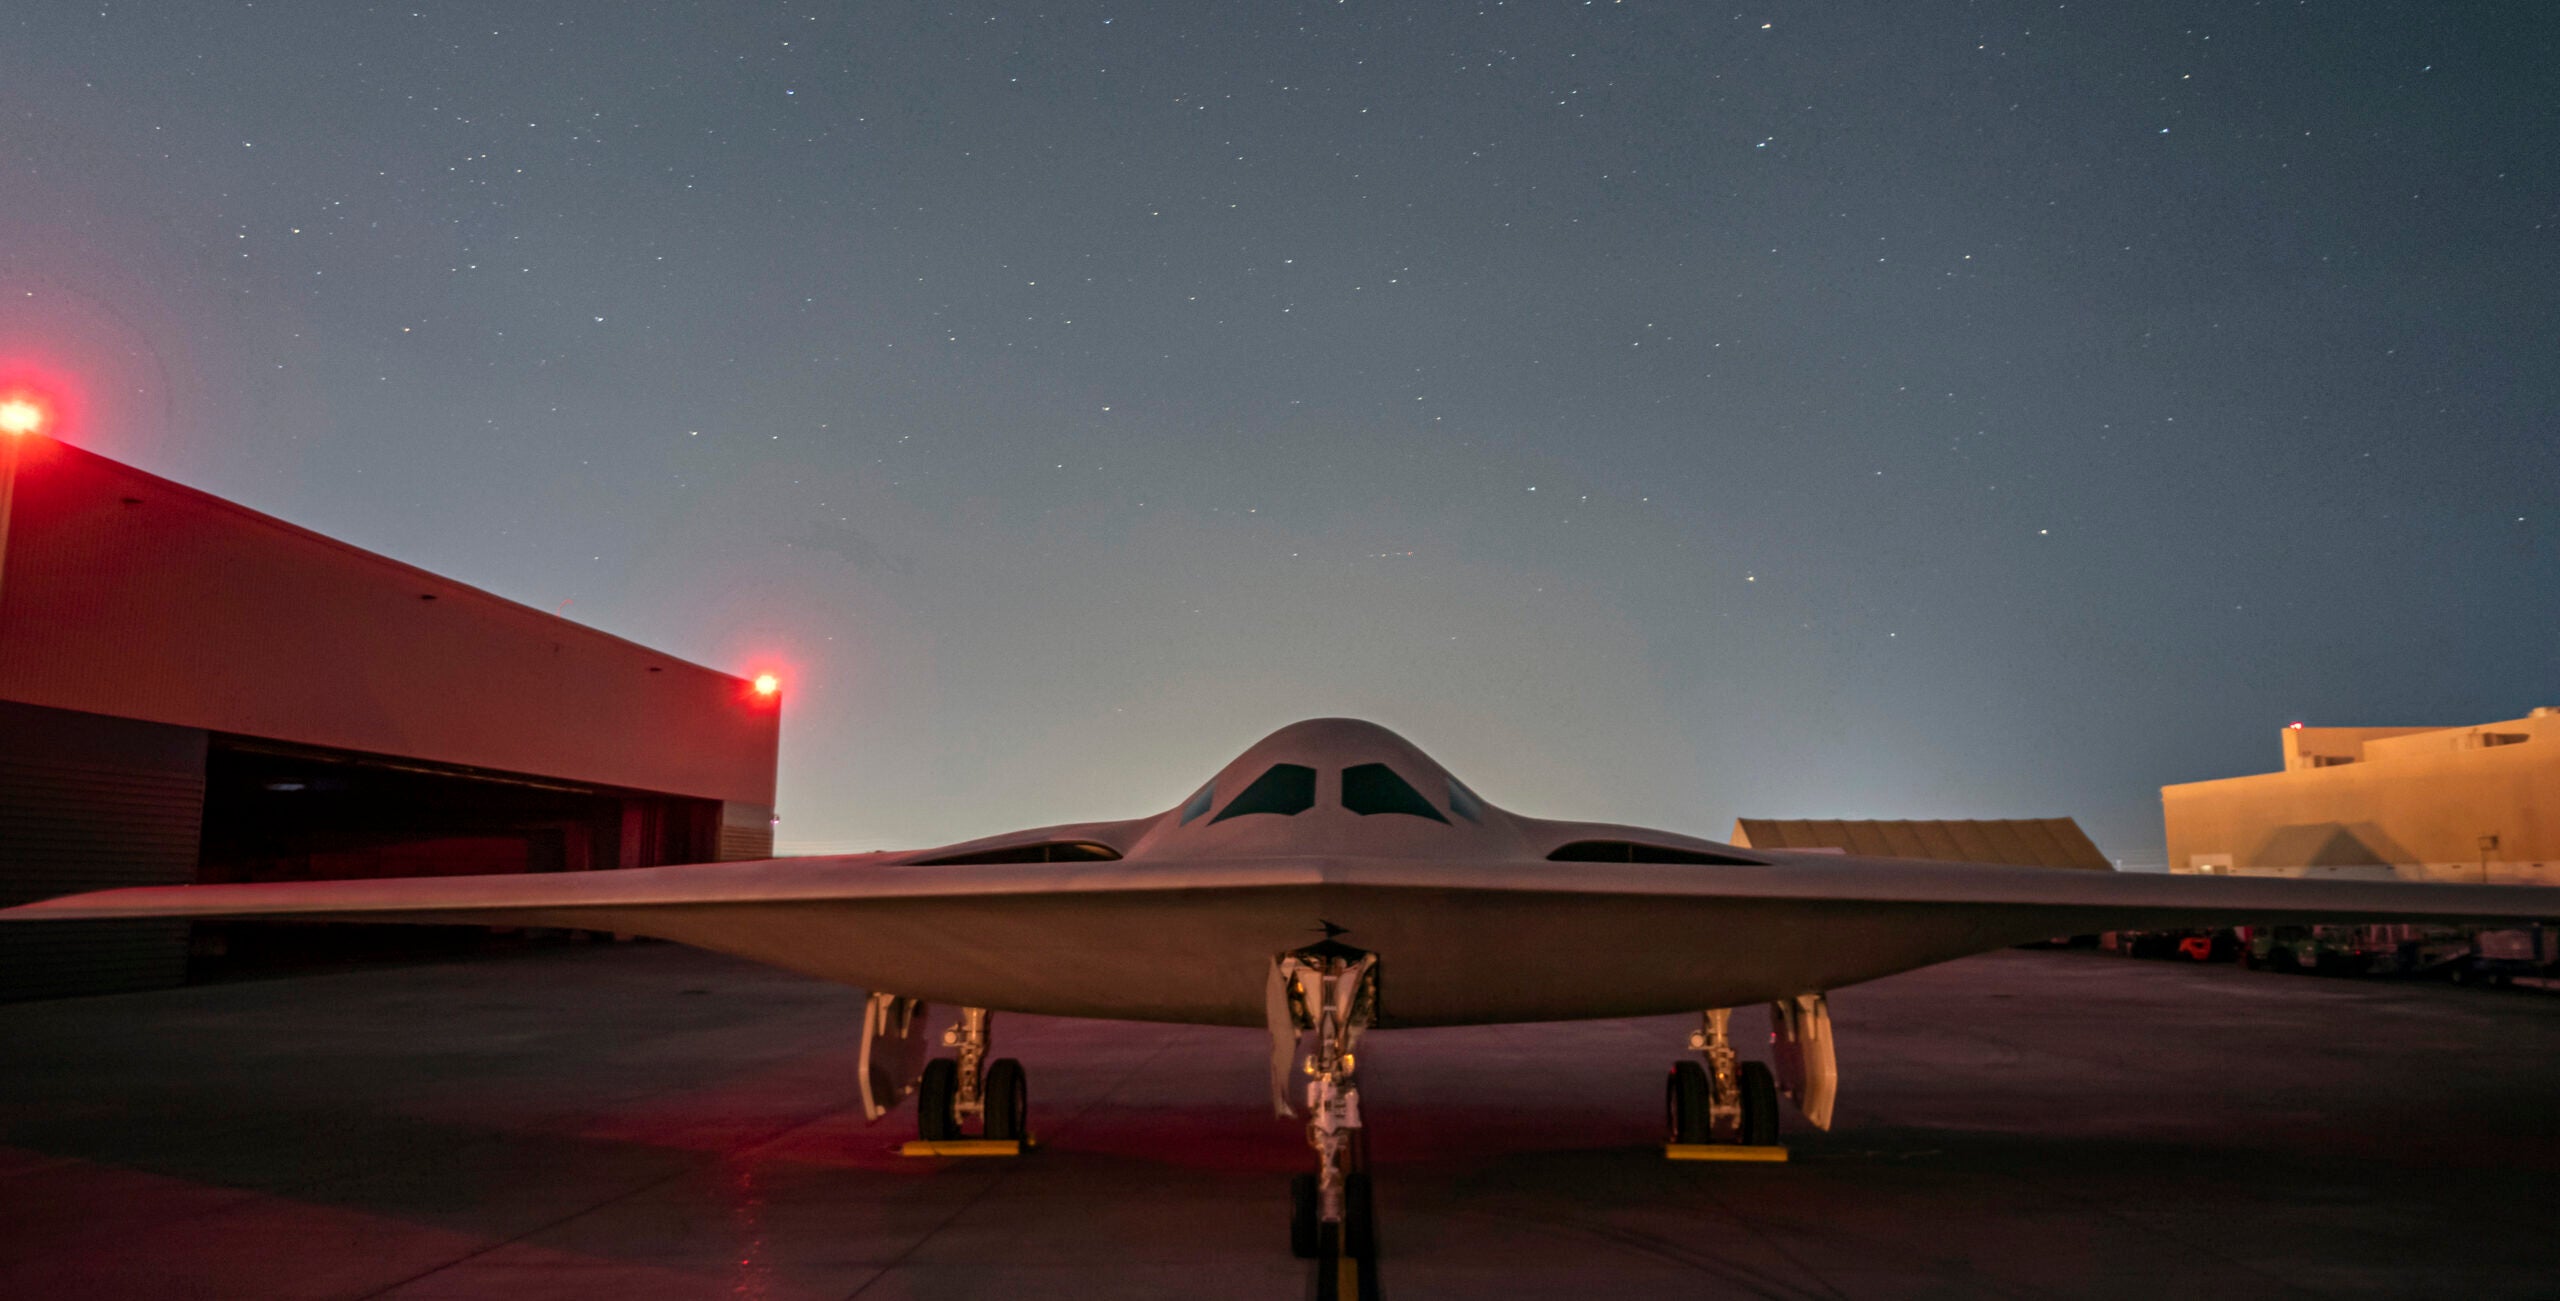 The B-21 Raider was unveiled to the public at a ceremony December 2, 2022 in

Palmdale, Calif. Designed to operate in tomorrow's high-end threat environment, the B-21 will play a critical role in ensuring America's enduring airpower capability. (U.S. Air Force photo)